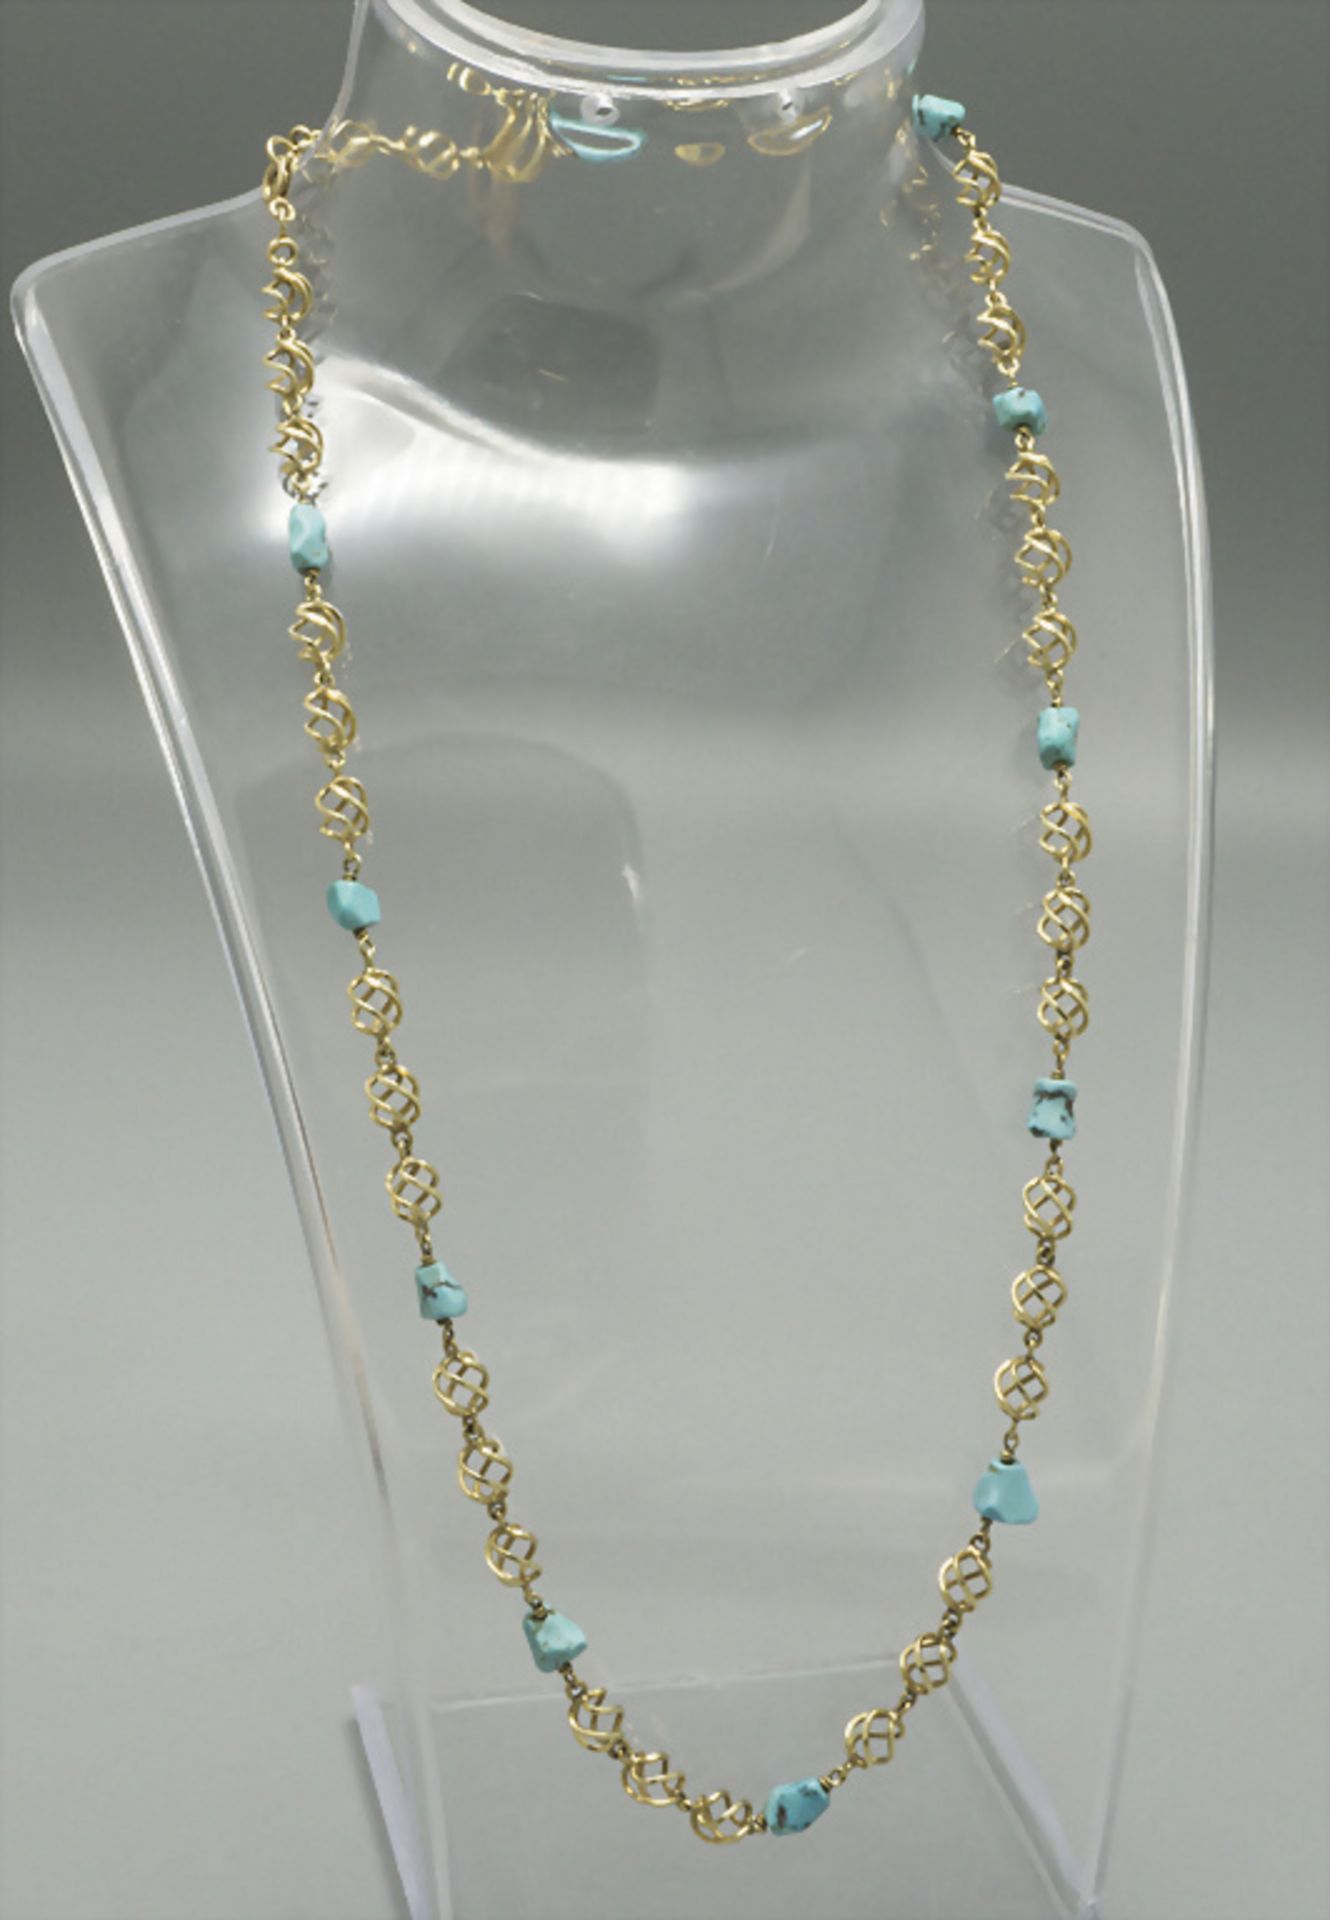 Collier mit Türkise / An 18k gold necklace with turquoise